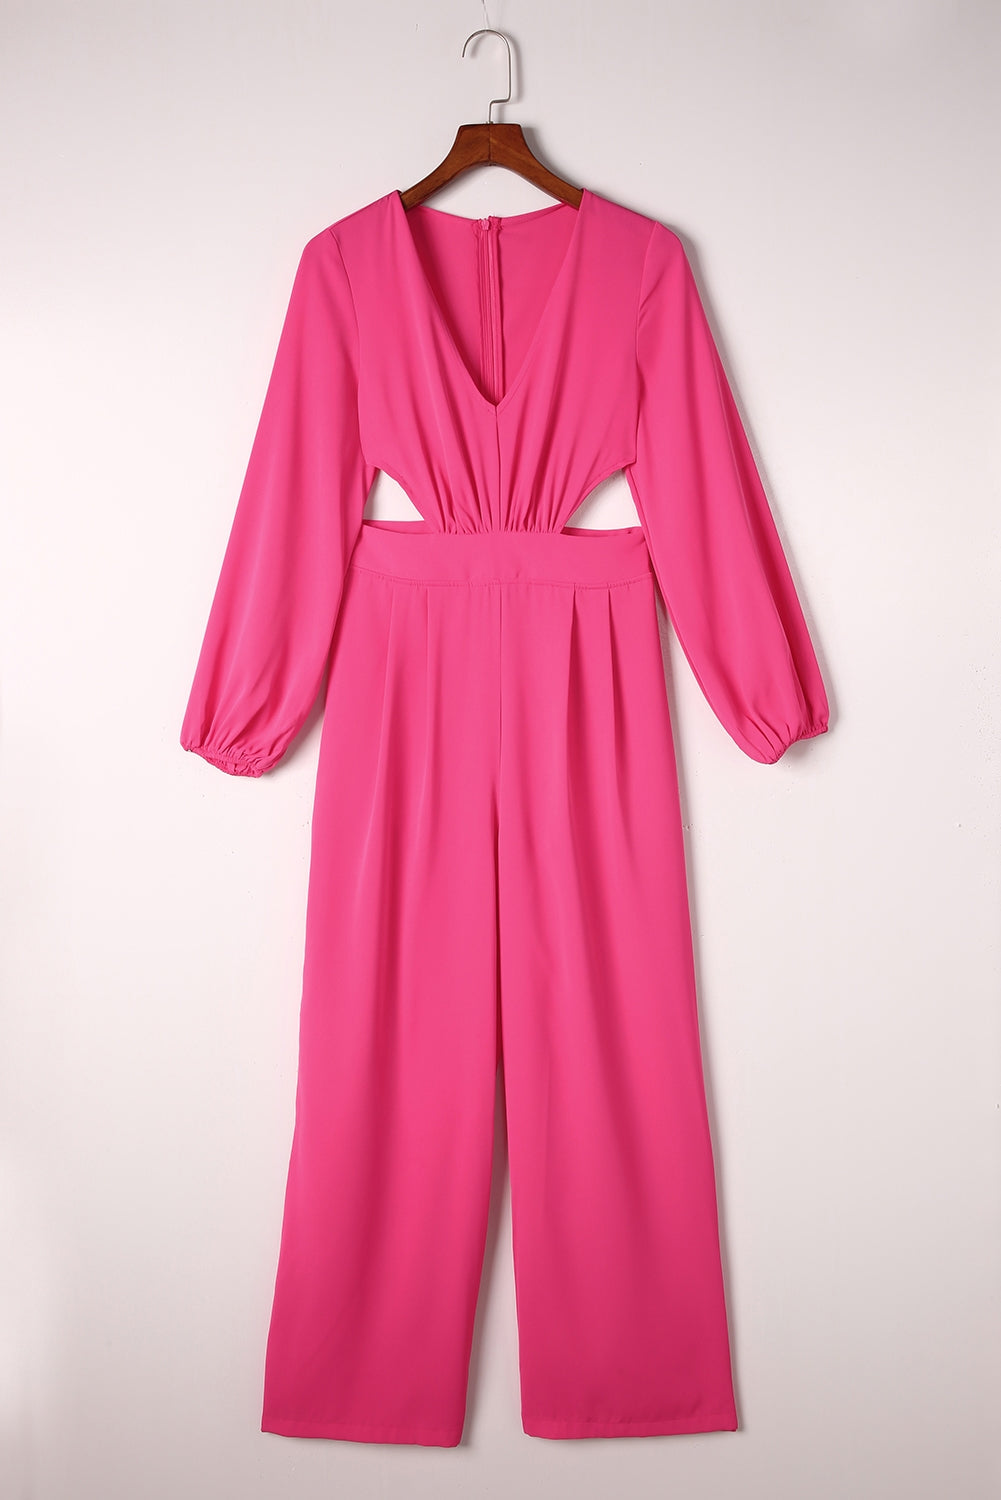 Cutout Side Plunge V-neck Long Sleeve Pant One-piece Neon Hot Pink Jumpsuit